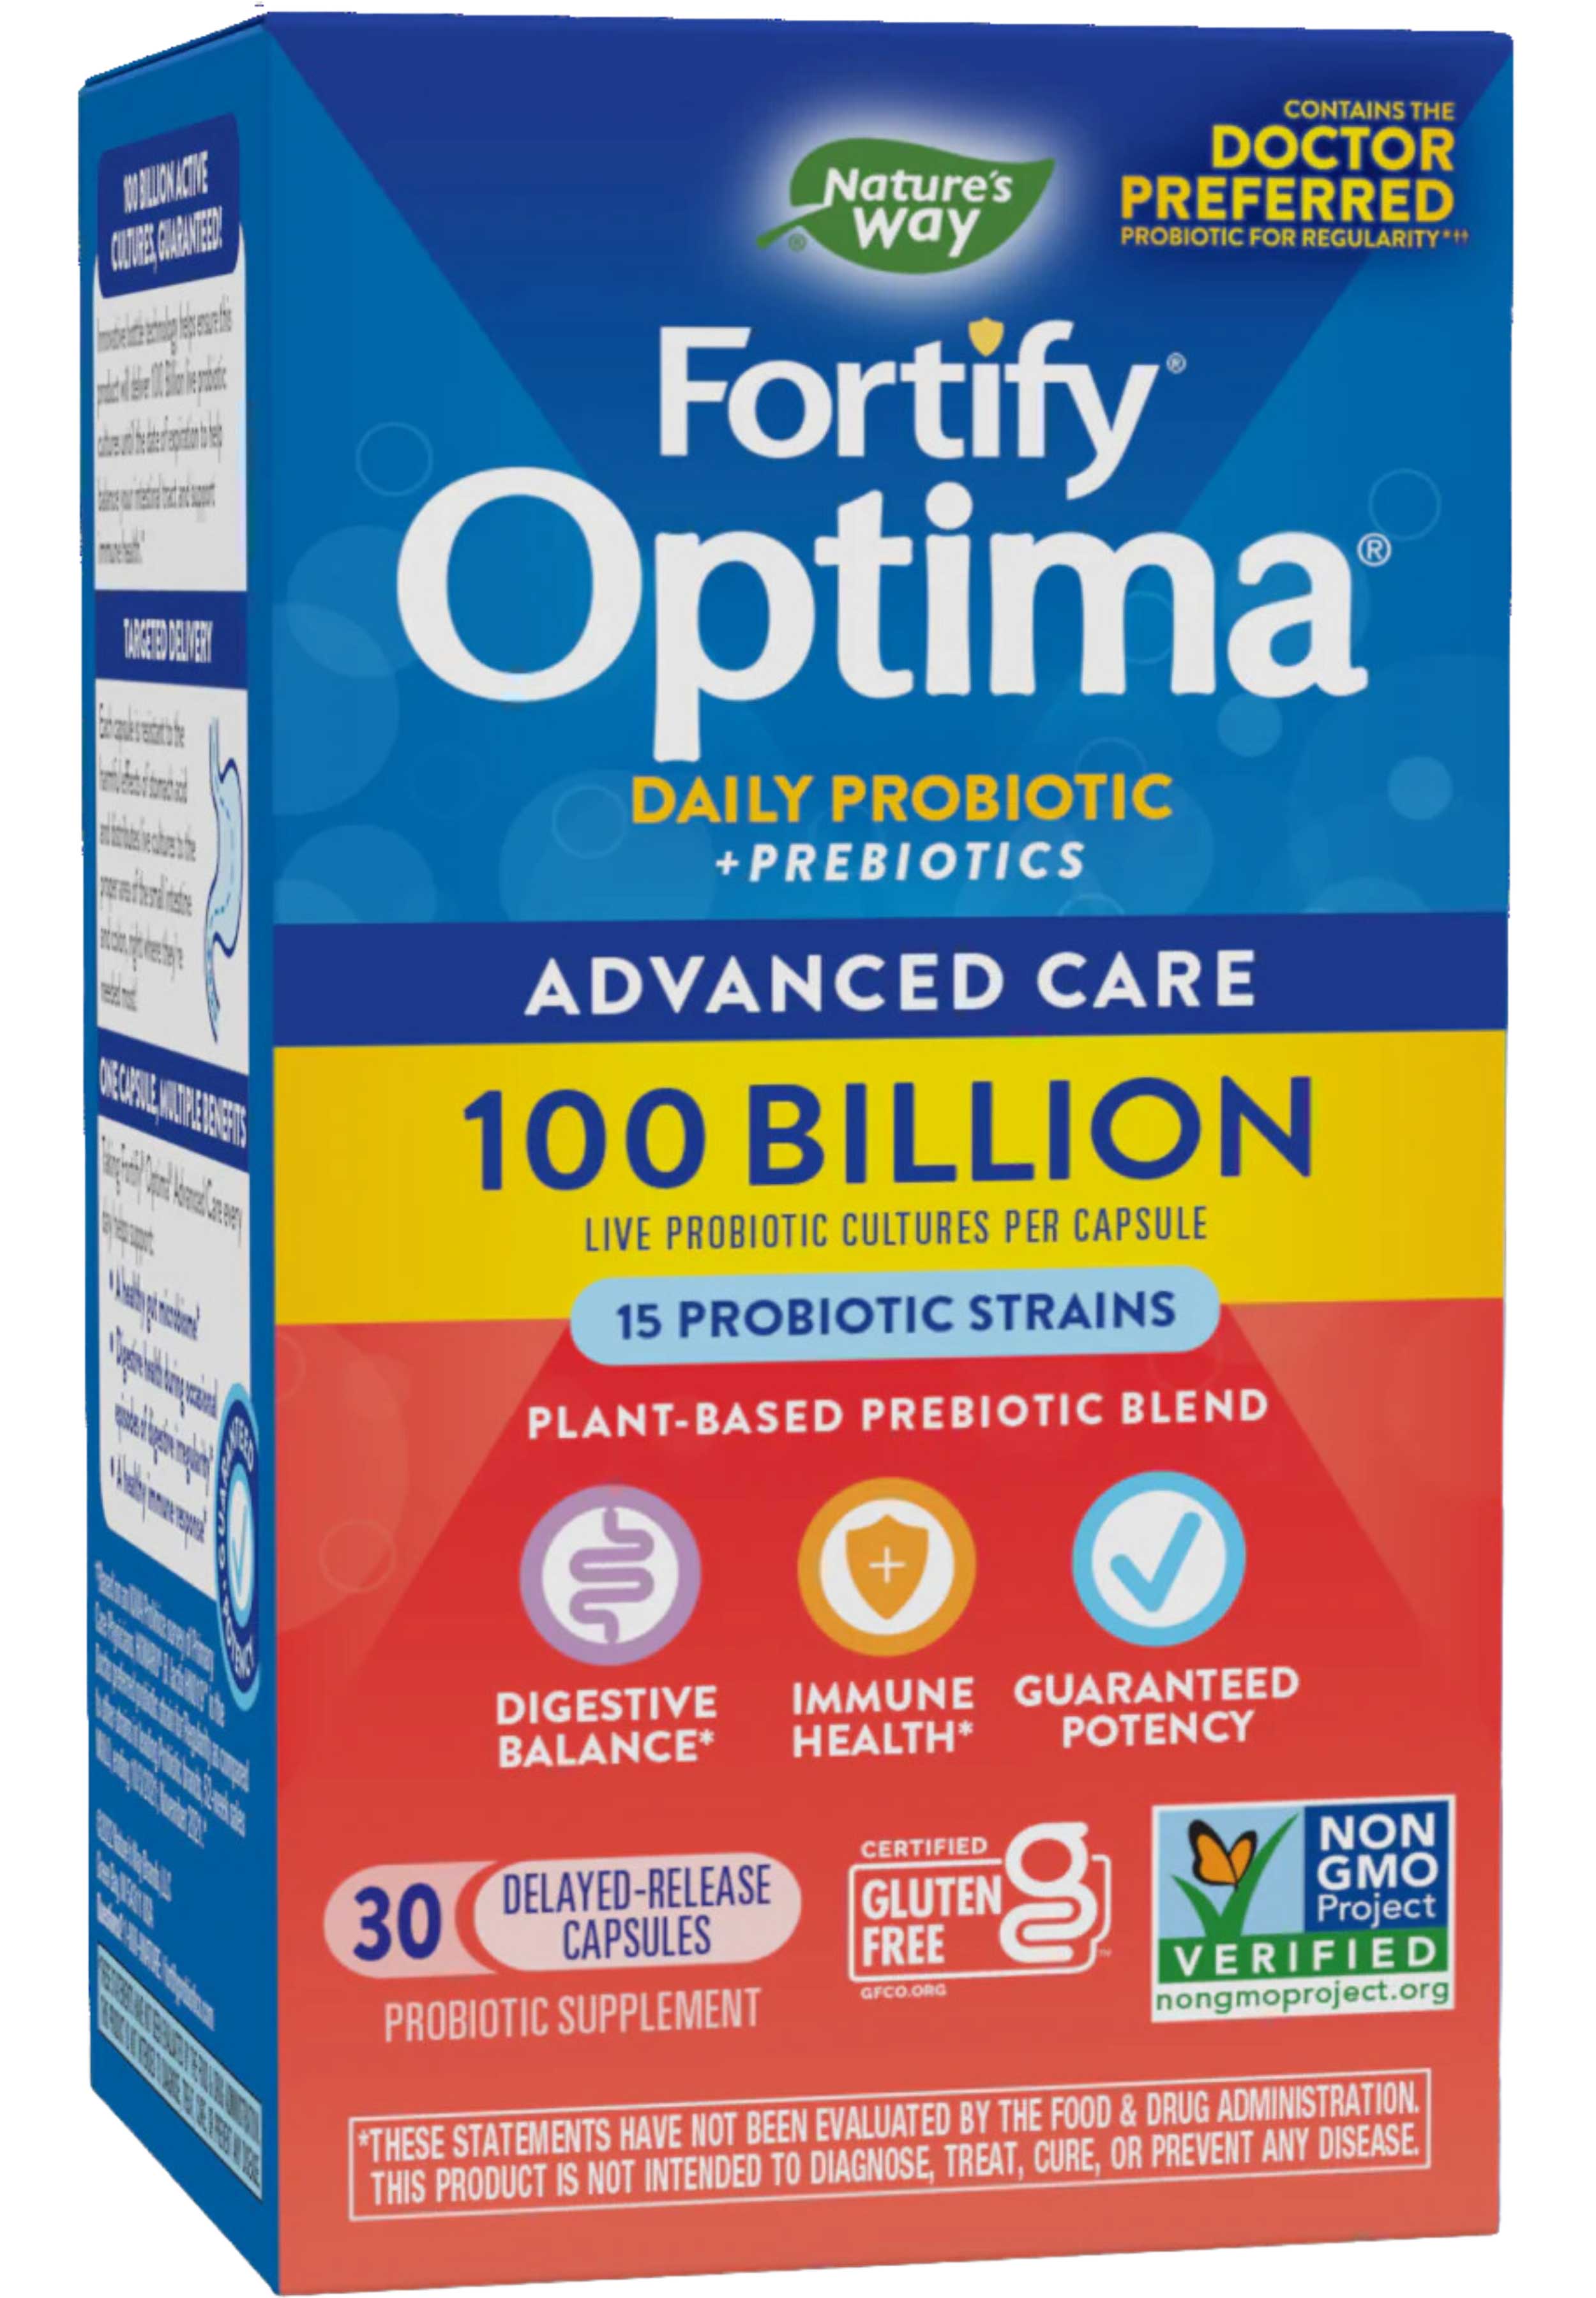 Nature's Way Fortify Optima Advanced Care/Fortify Optima Max Potency 100 Billion Probiotic 